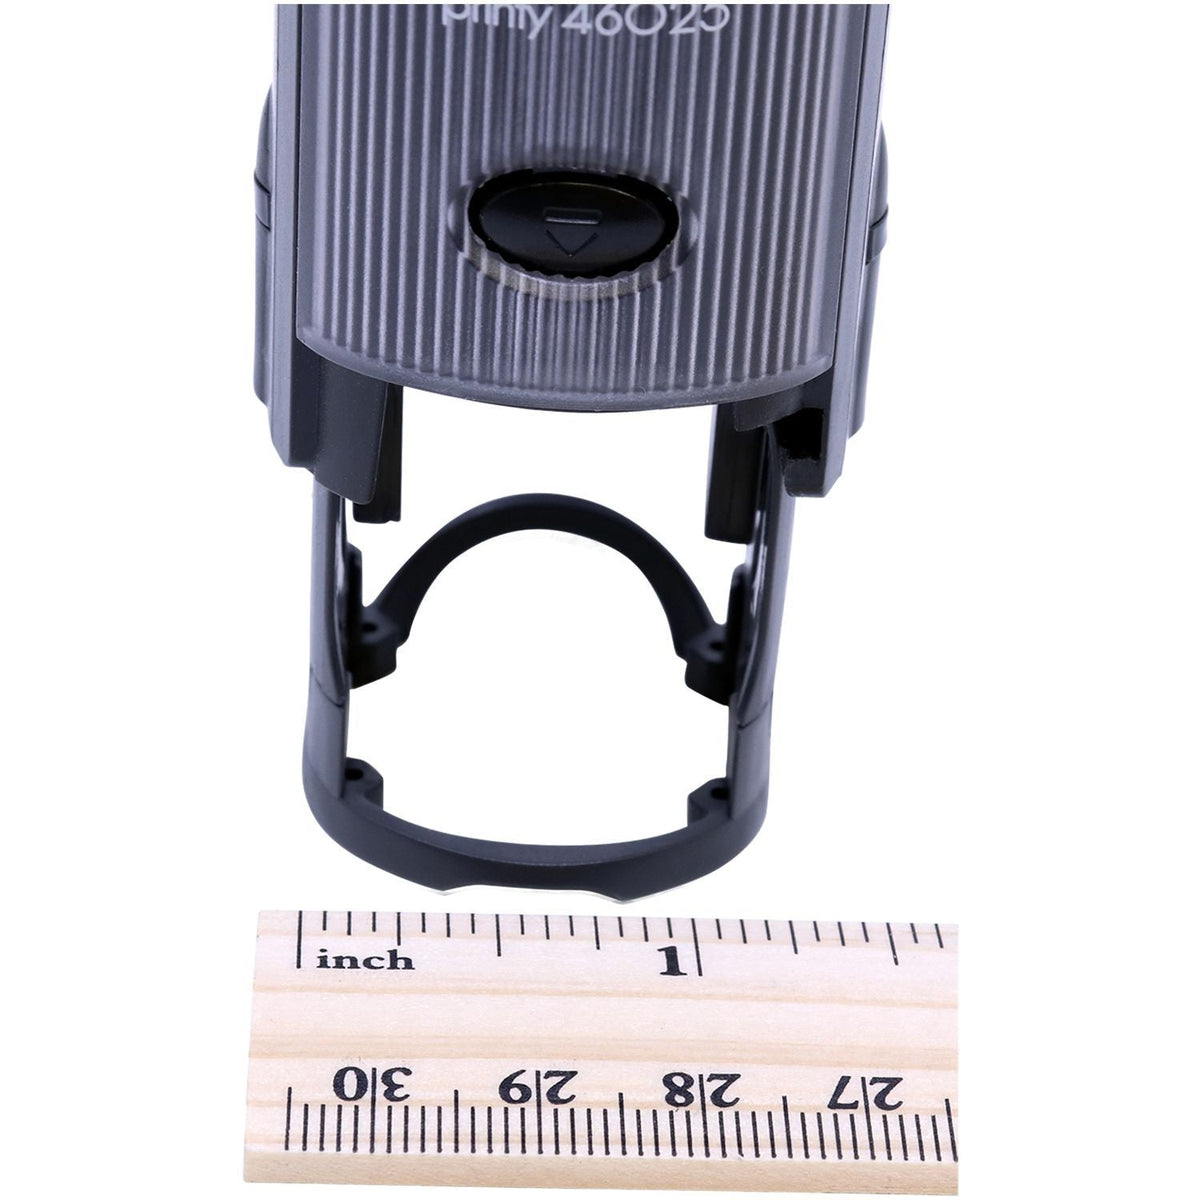 Measurment of Self-Inking Round Shocked Smiley Stamp with Ruler